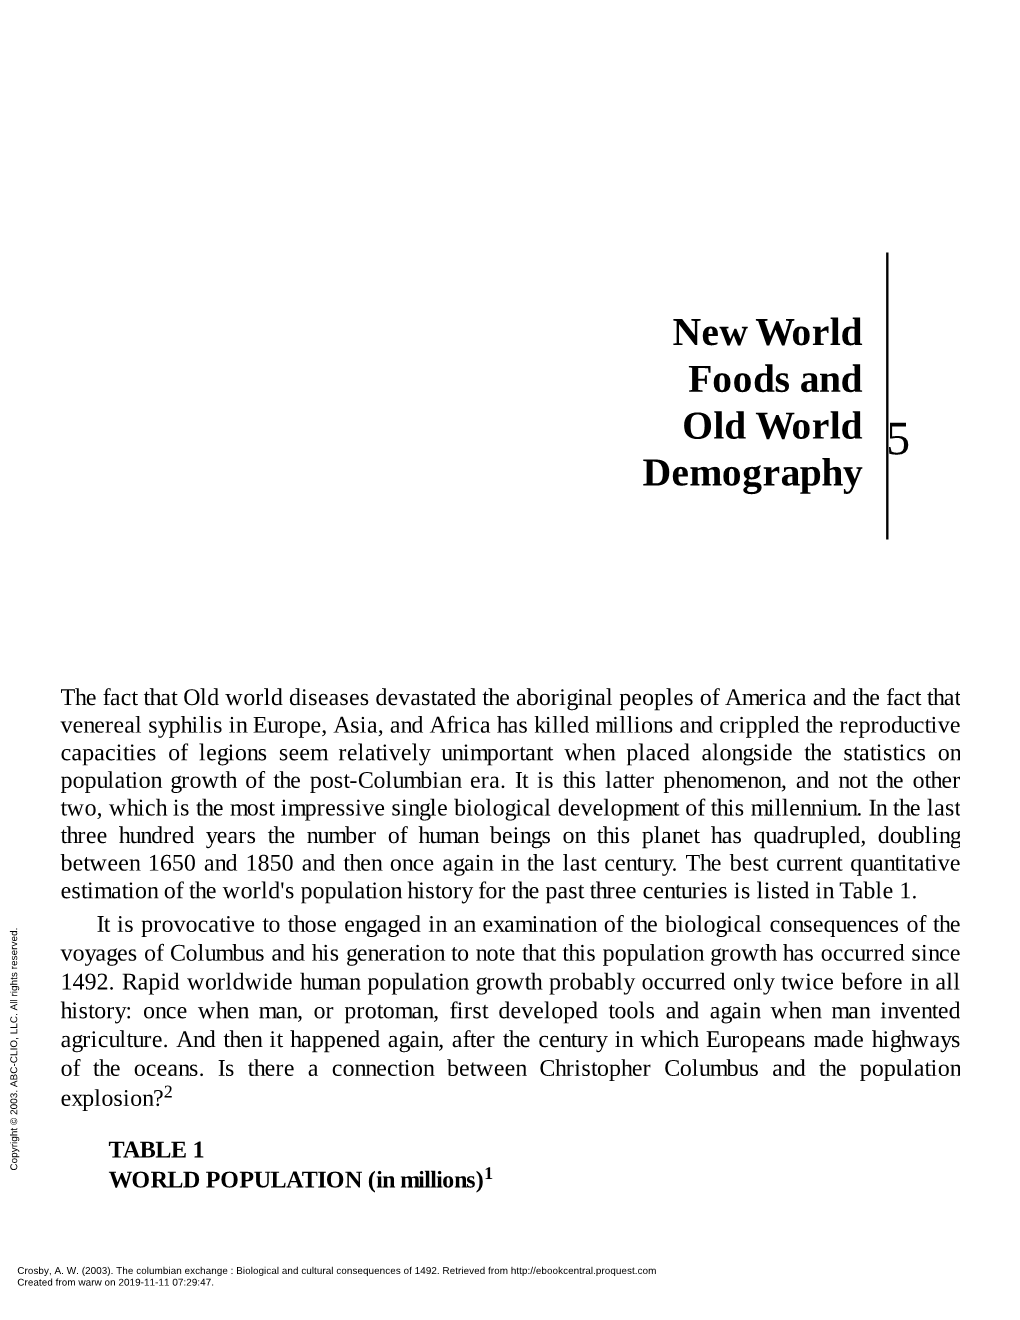 New World Foods and Old World Demography